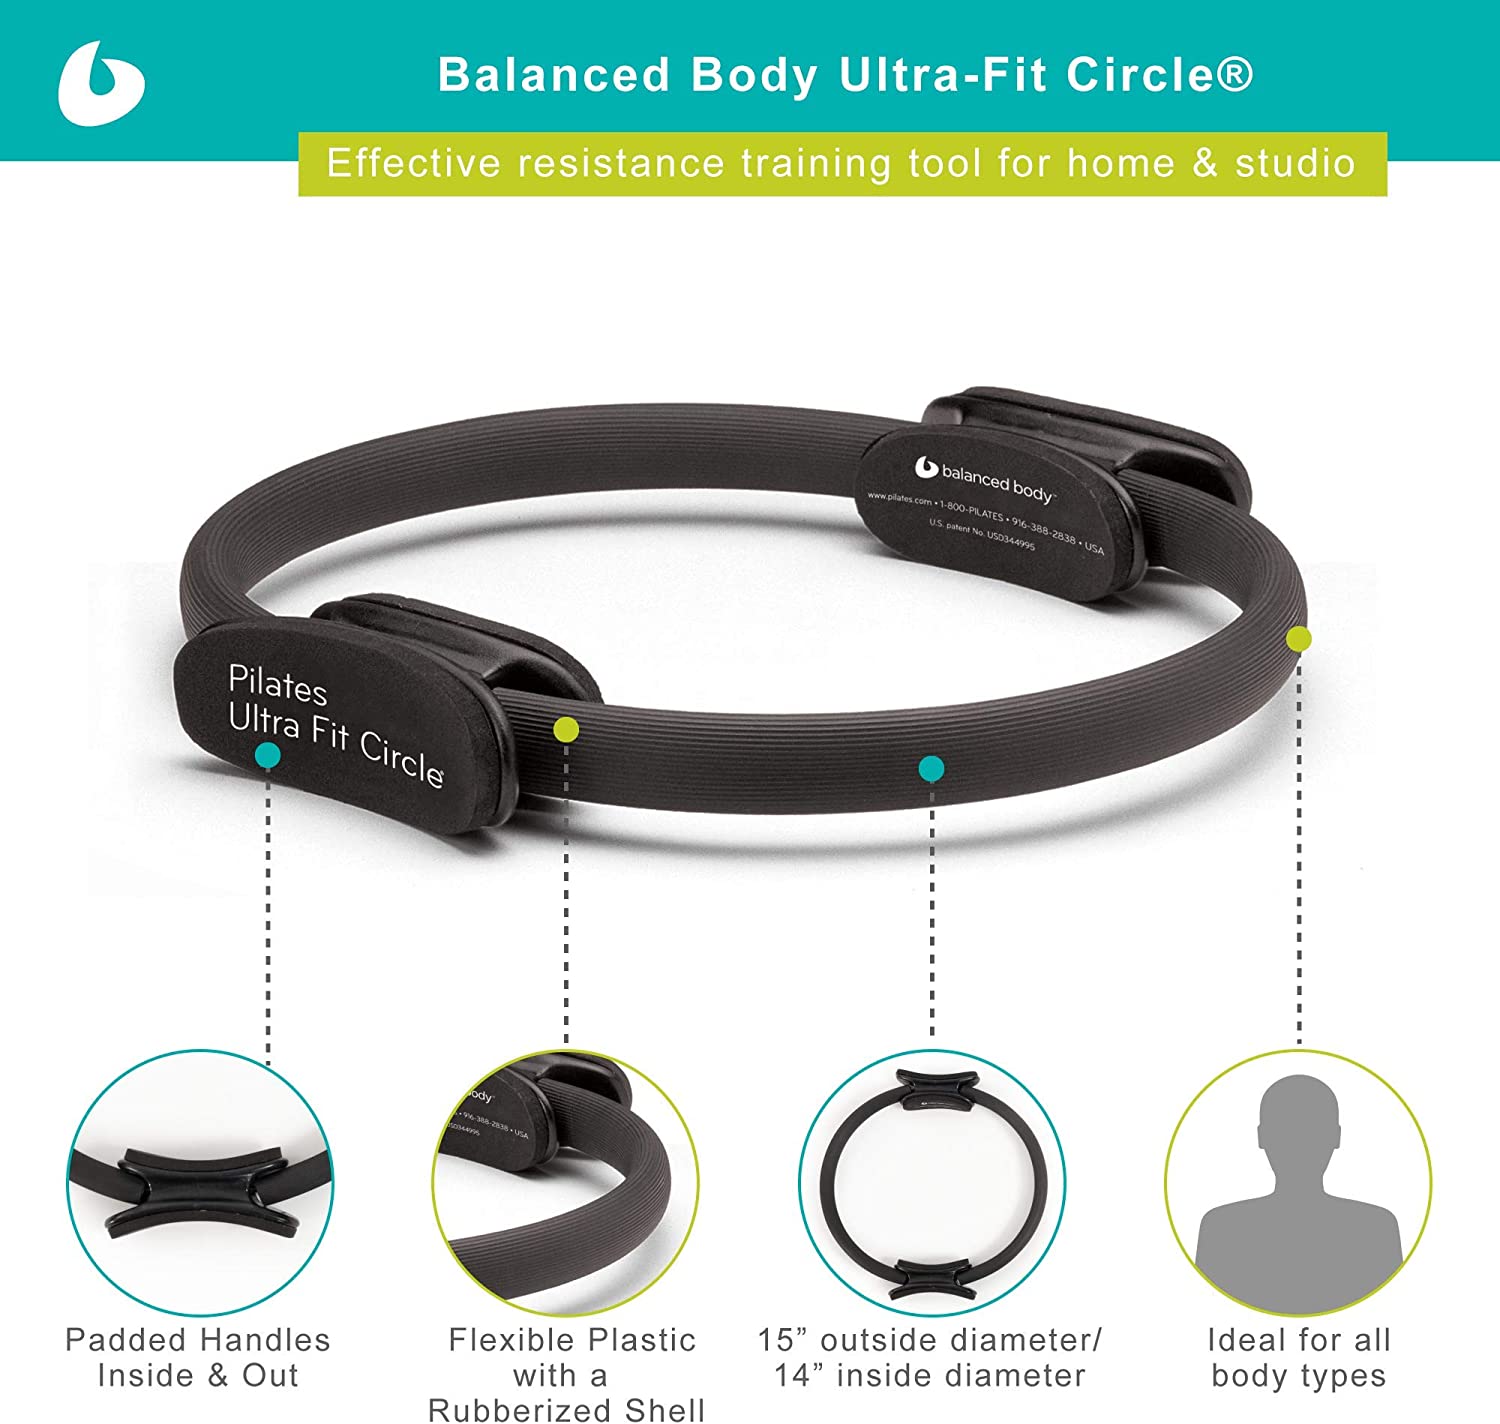 Balanced Body Ultra-Fit Circle for at-home workouts